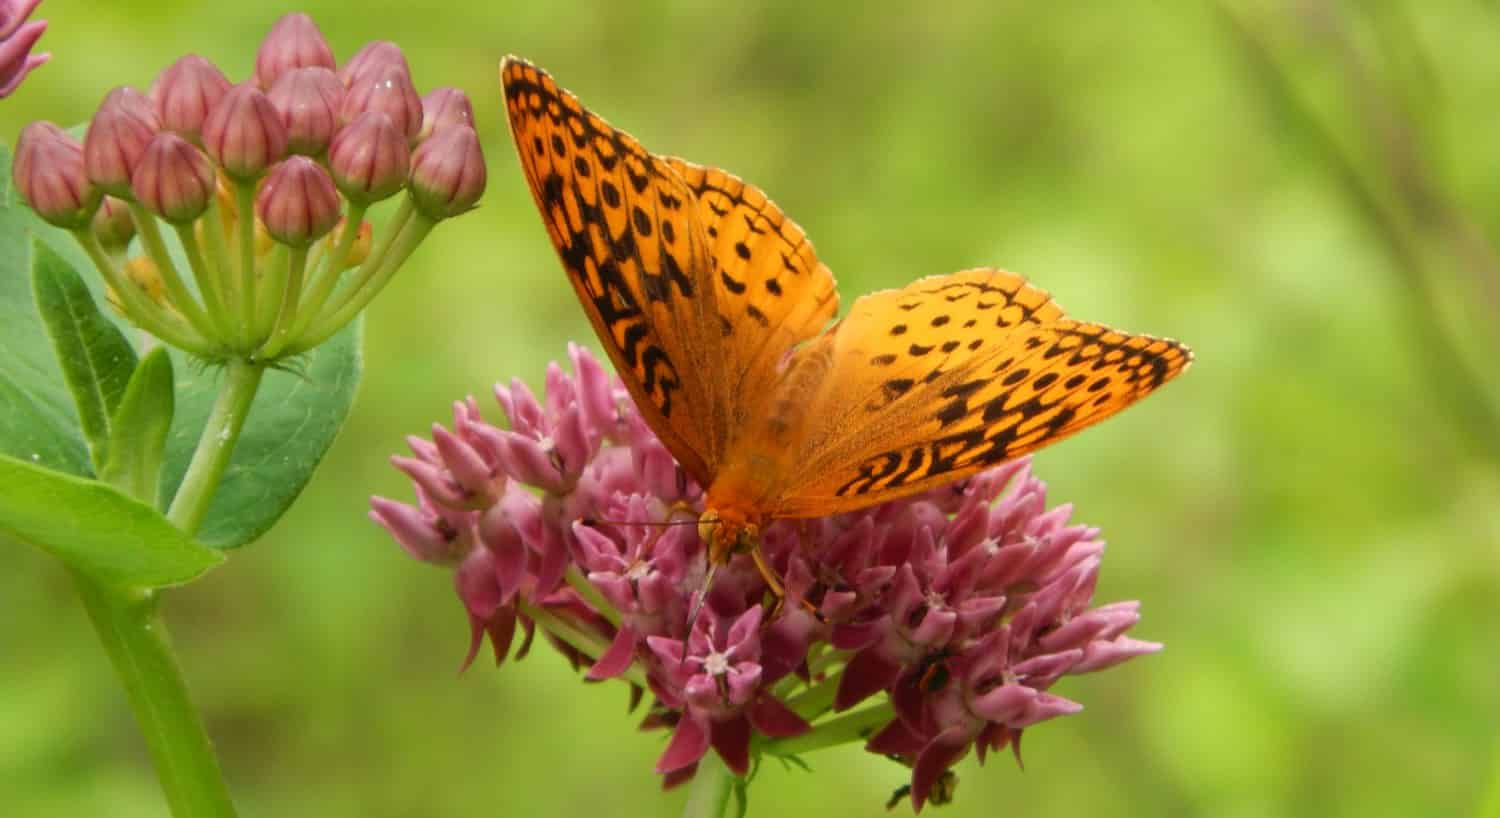 Bright orange and black butterfly sitting on top of bright pink flower